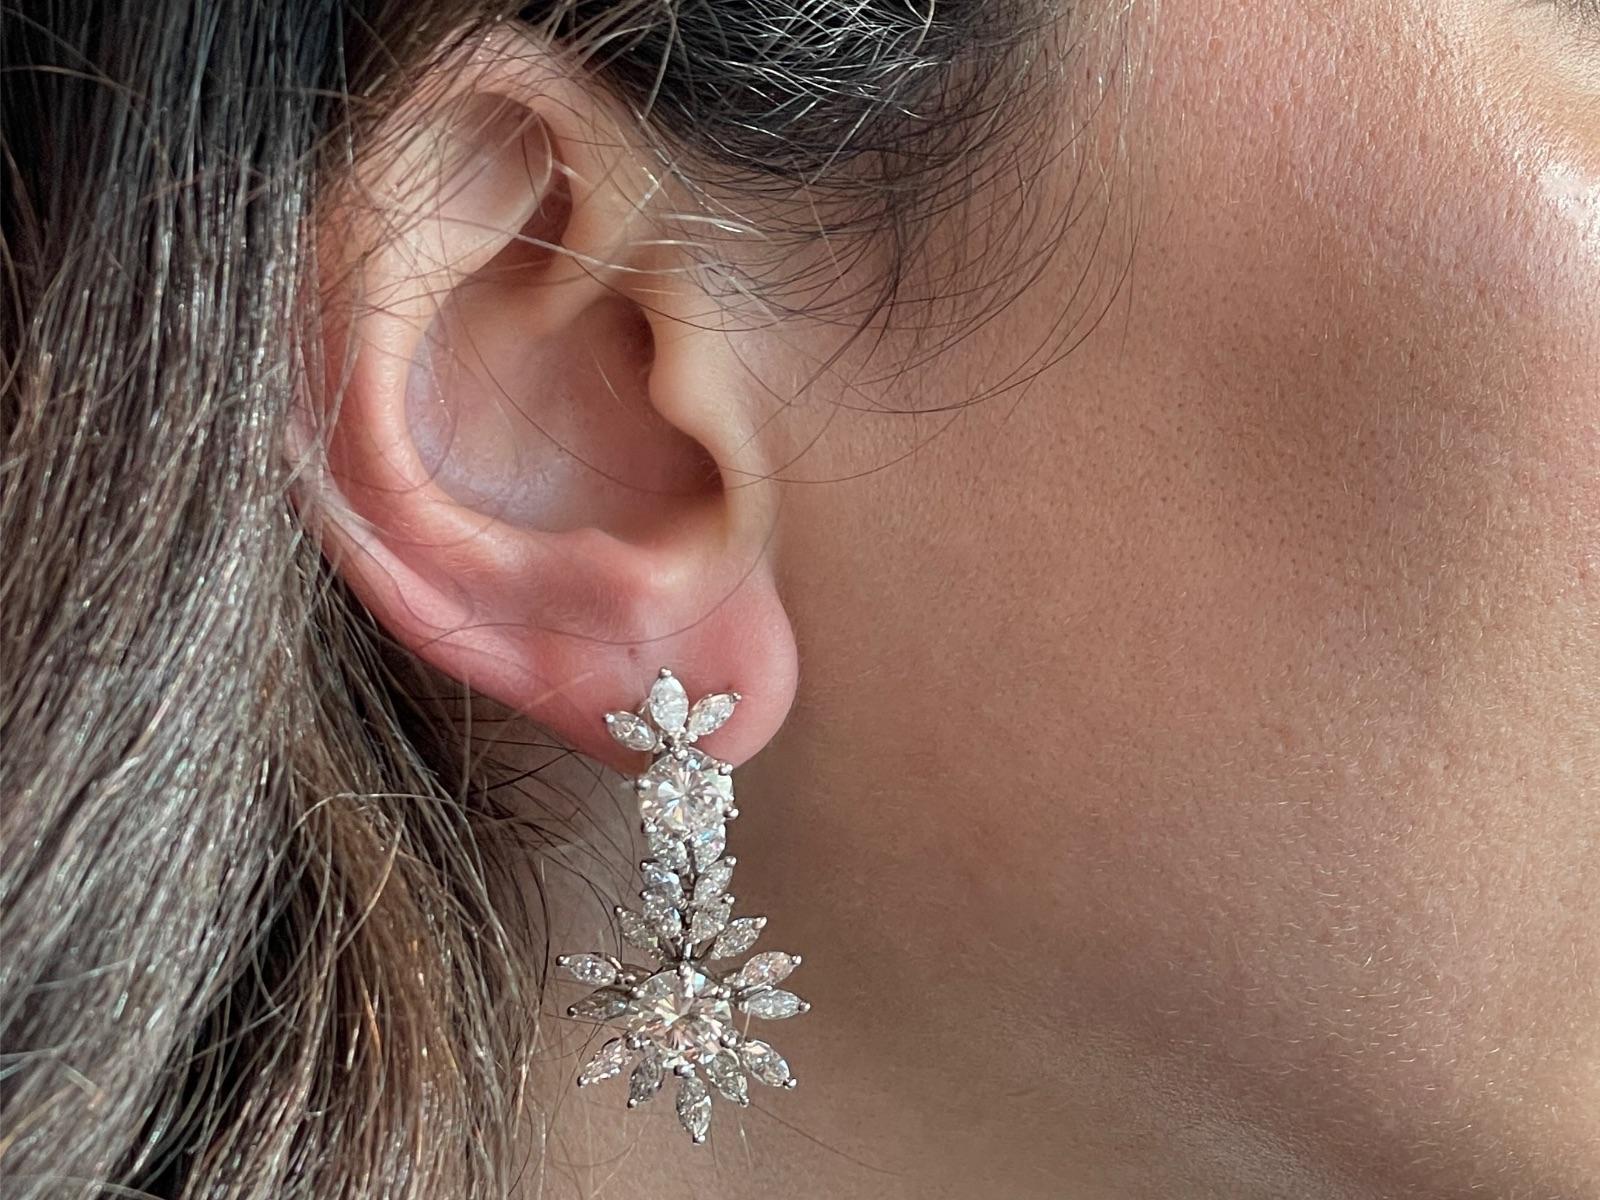 Introducing these exquisite earrings, crafted with meticulous attention to detail and adorned with breathtaking diamonds. The first pair features two dazzling brilliant-cut diamonds, each weighing an impressive 3.40 carats. With a color grade of G-H